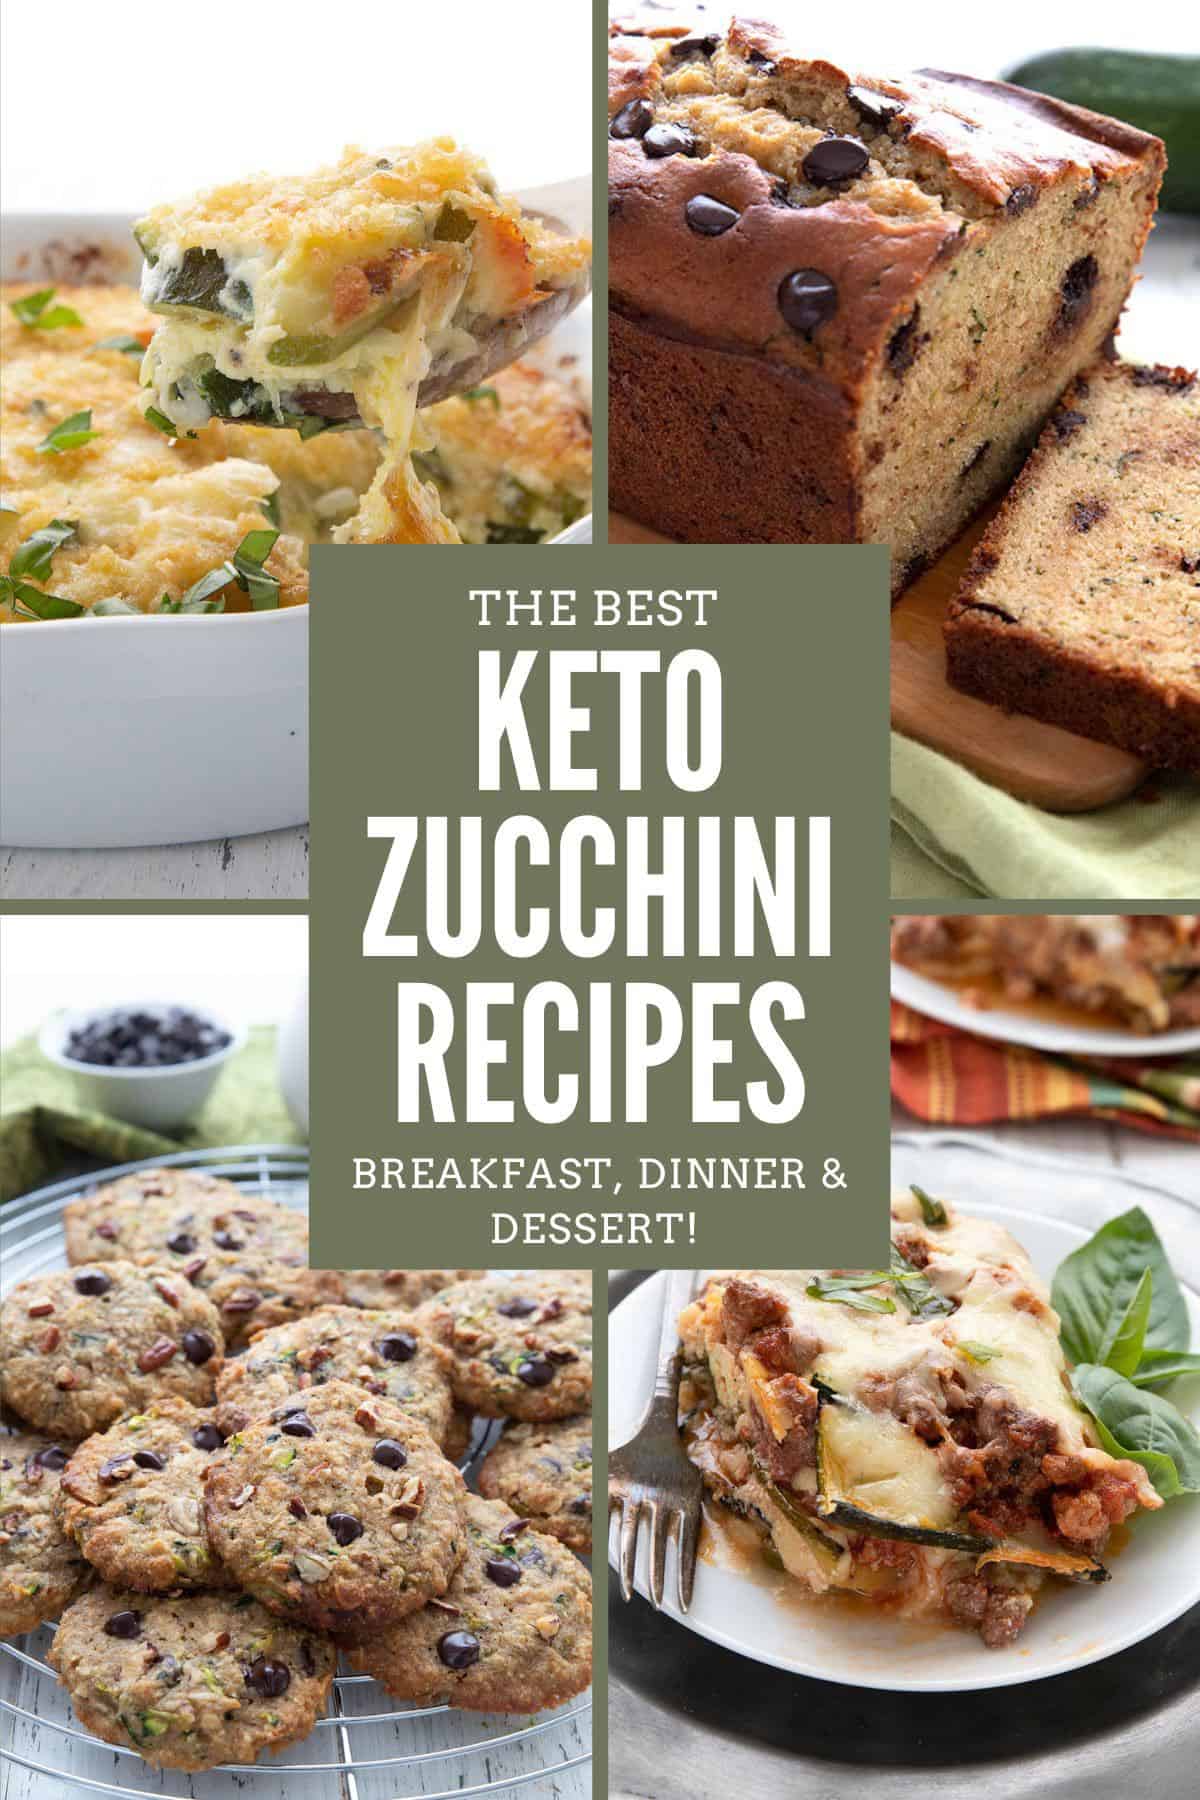 A collage of four images showing keto zucchini recipes, with the title in the center.